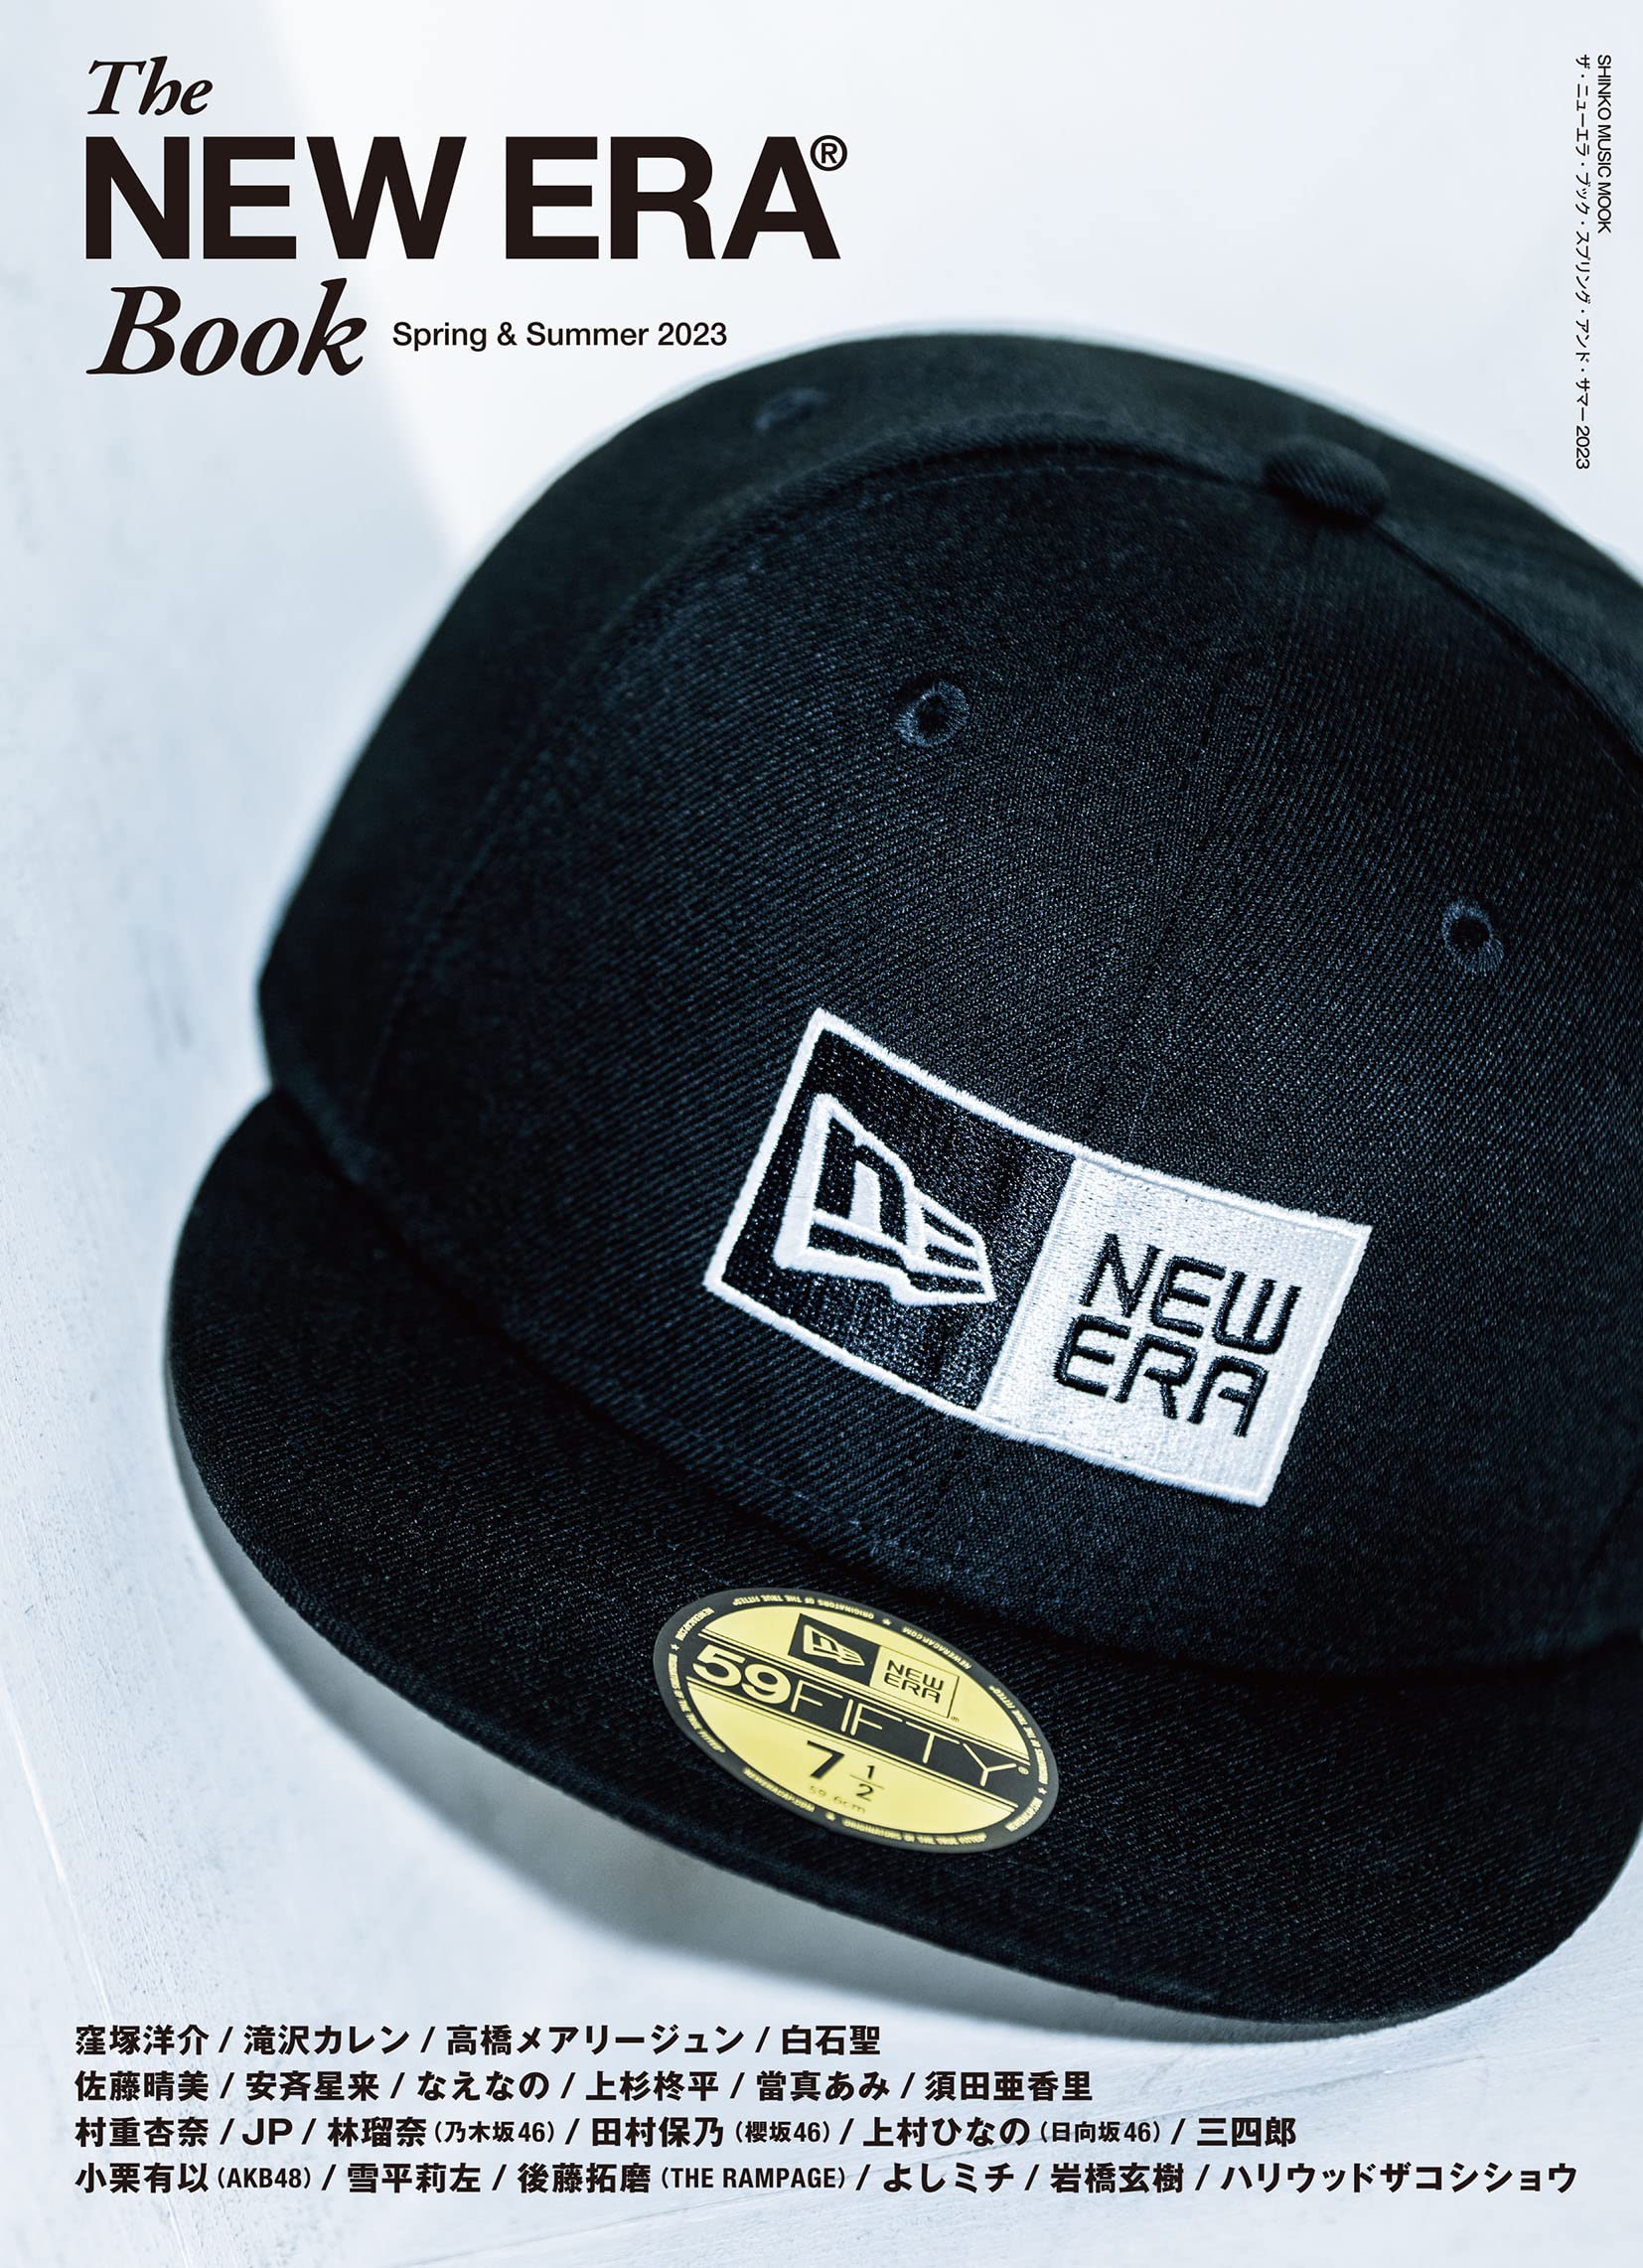 The NEW ERA Book Spring & Summer 2023(シンコ-·ミュ-ジックMOOK)